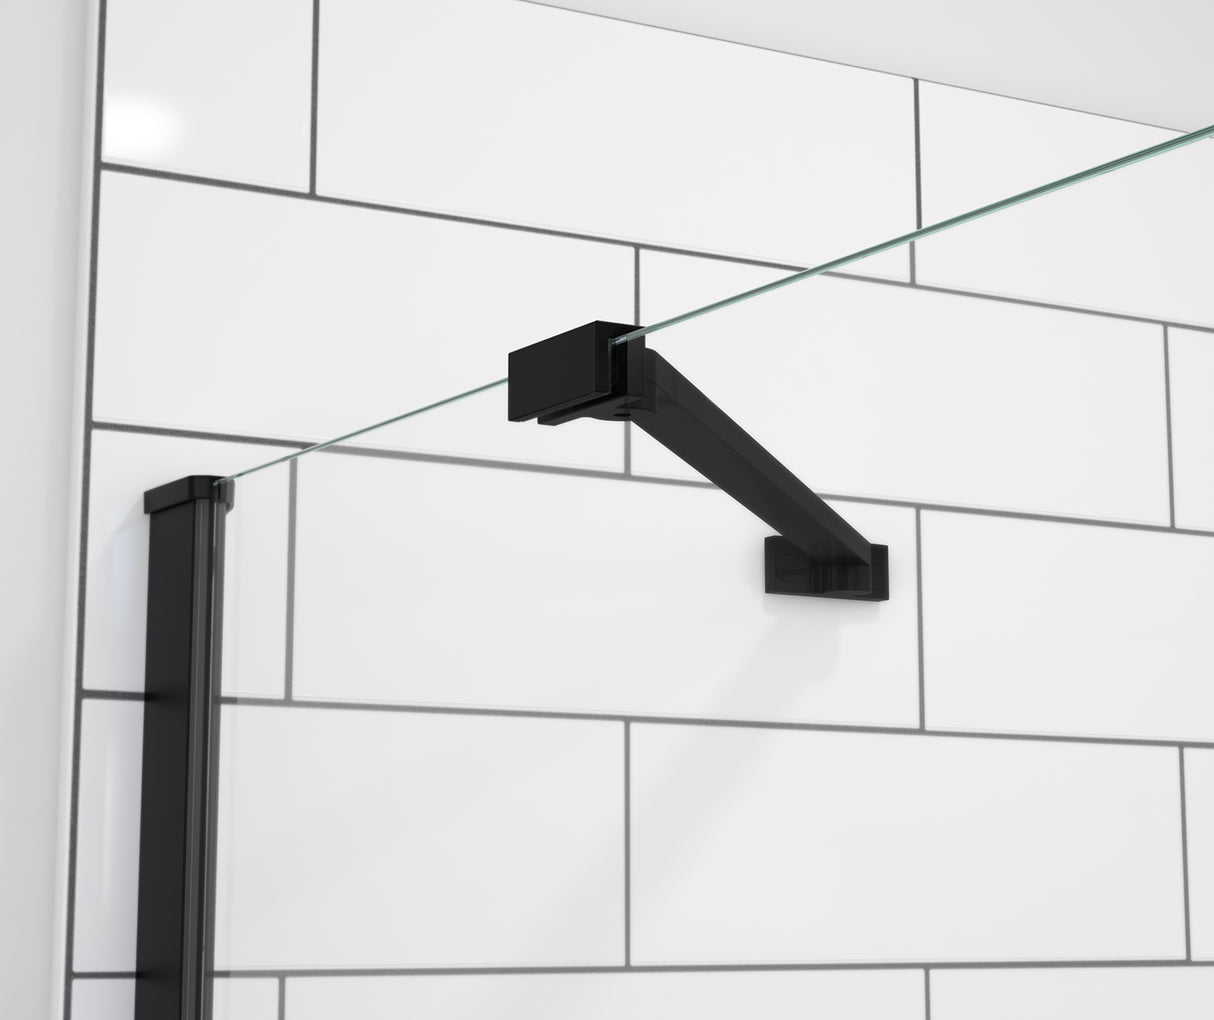 MAAX 139578-900-340-000 Reveal Sleek 71 44-47 x 71 ½ in. 8mm Pivot Shower Door for Alcove Installation with Clear glass in Matte Black